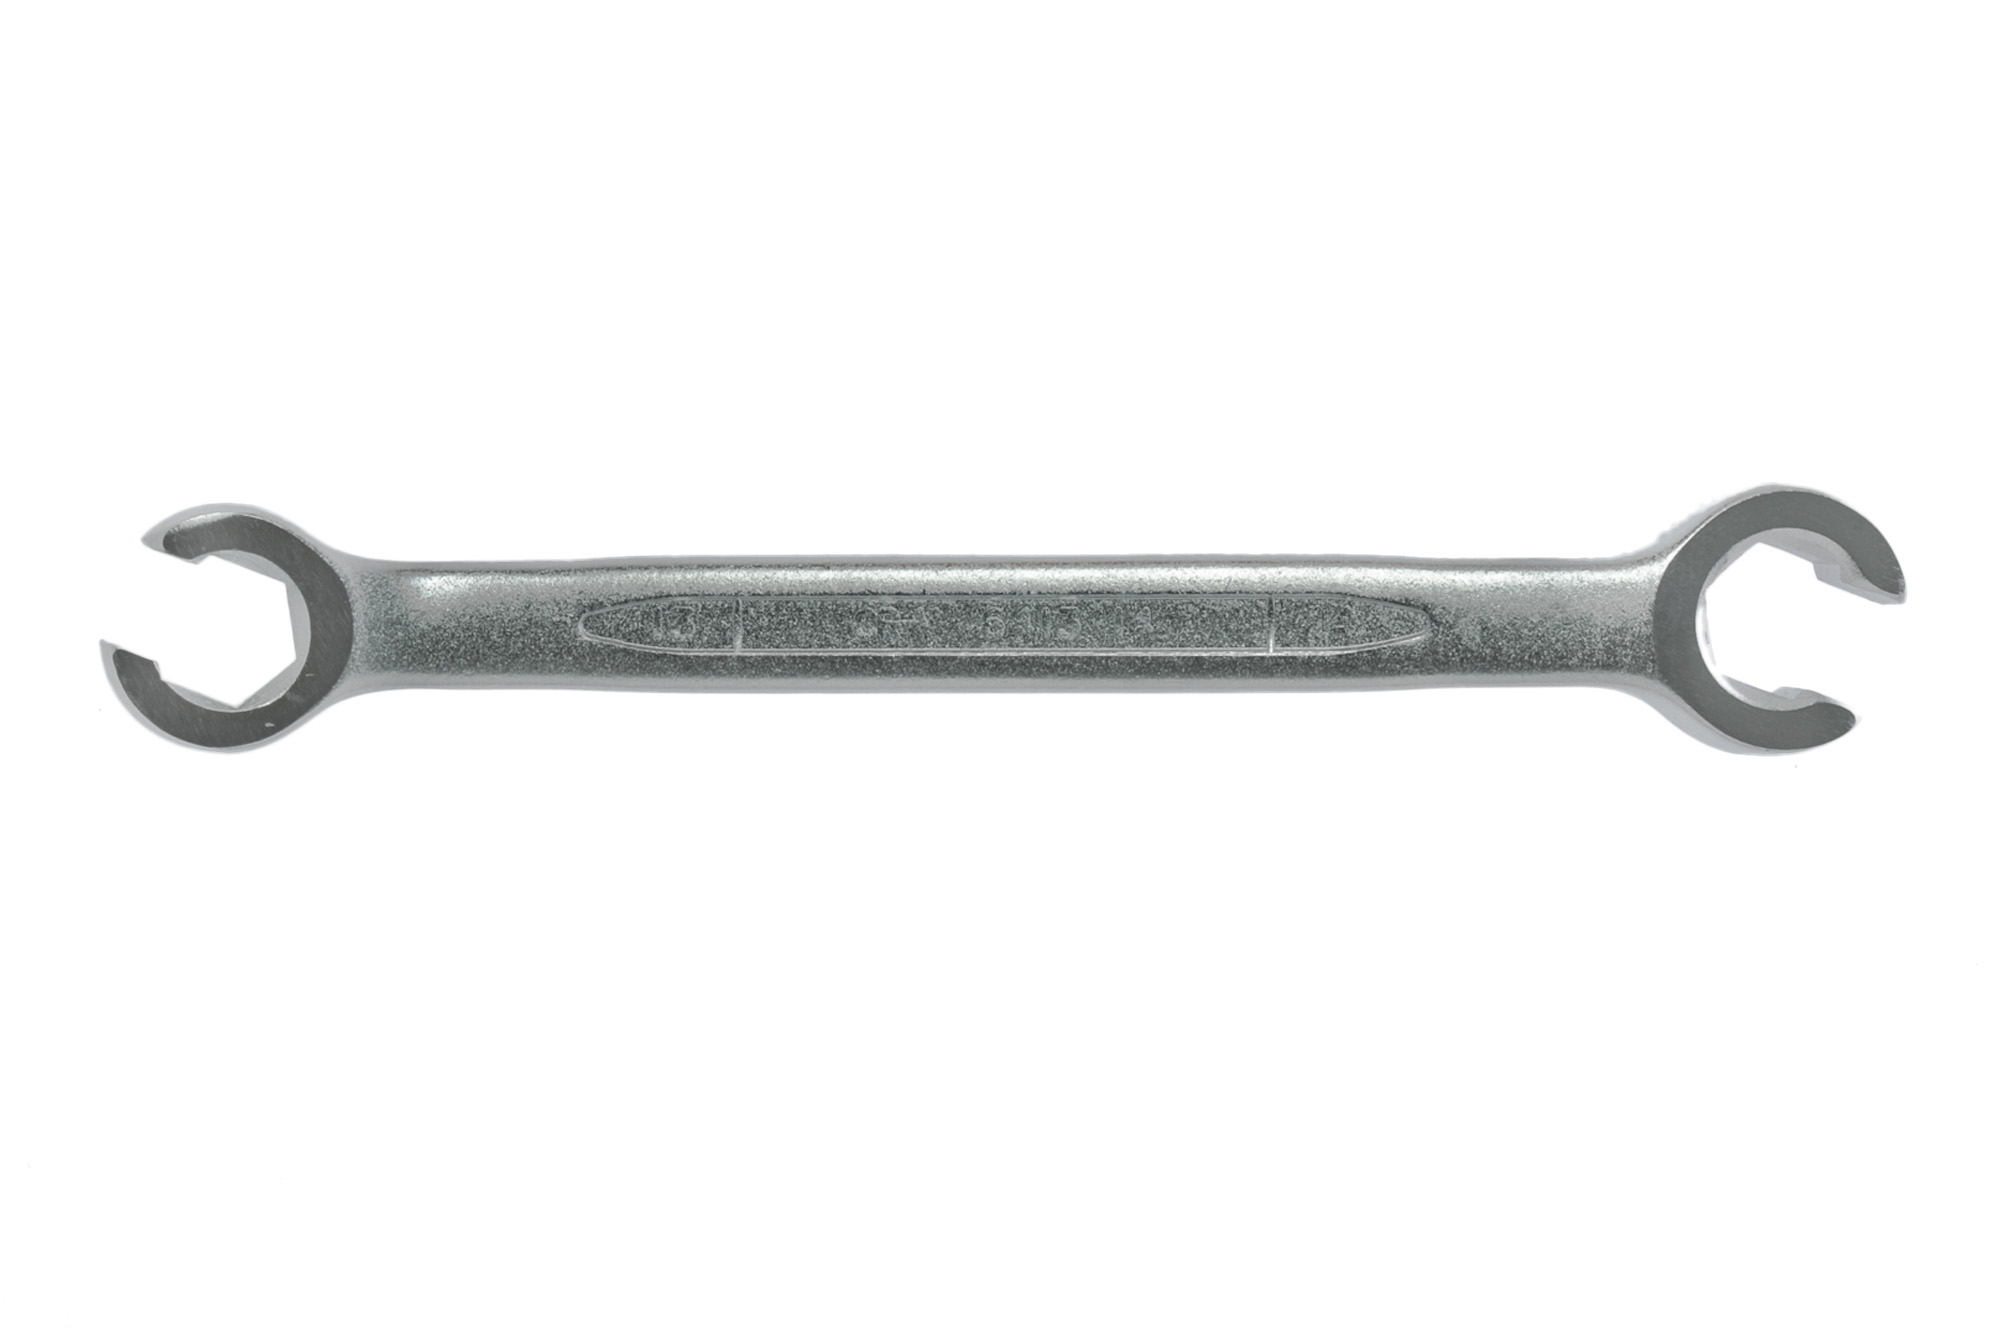 Teng Tools 13 x 14mm Double Flare Nut Wrench - 641314